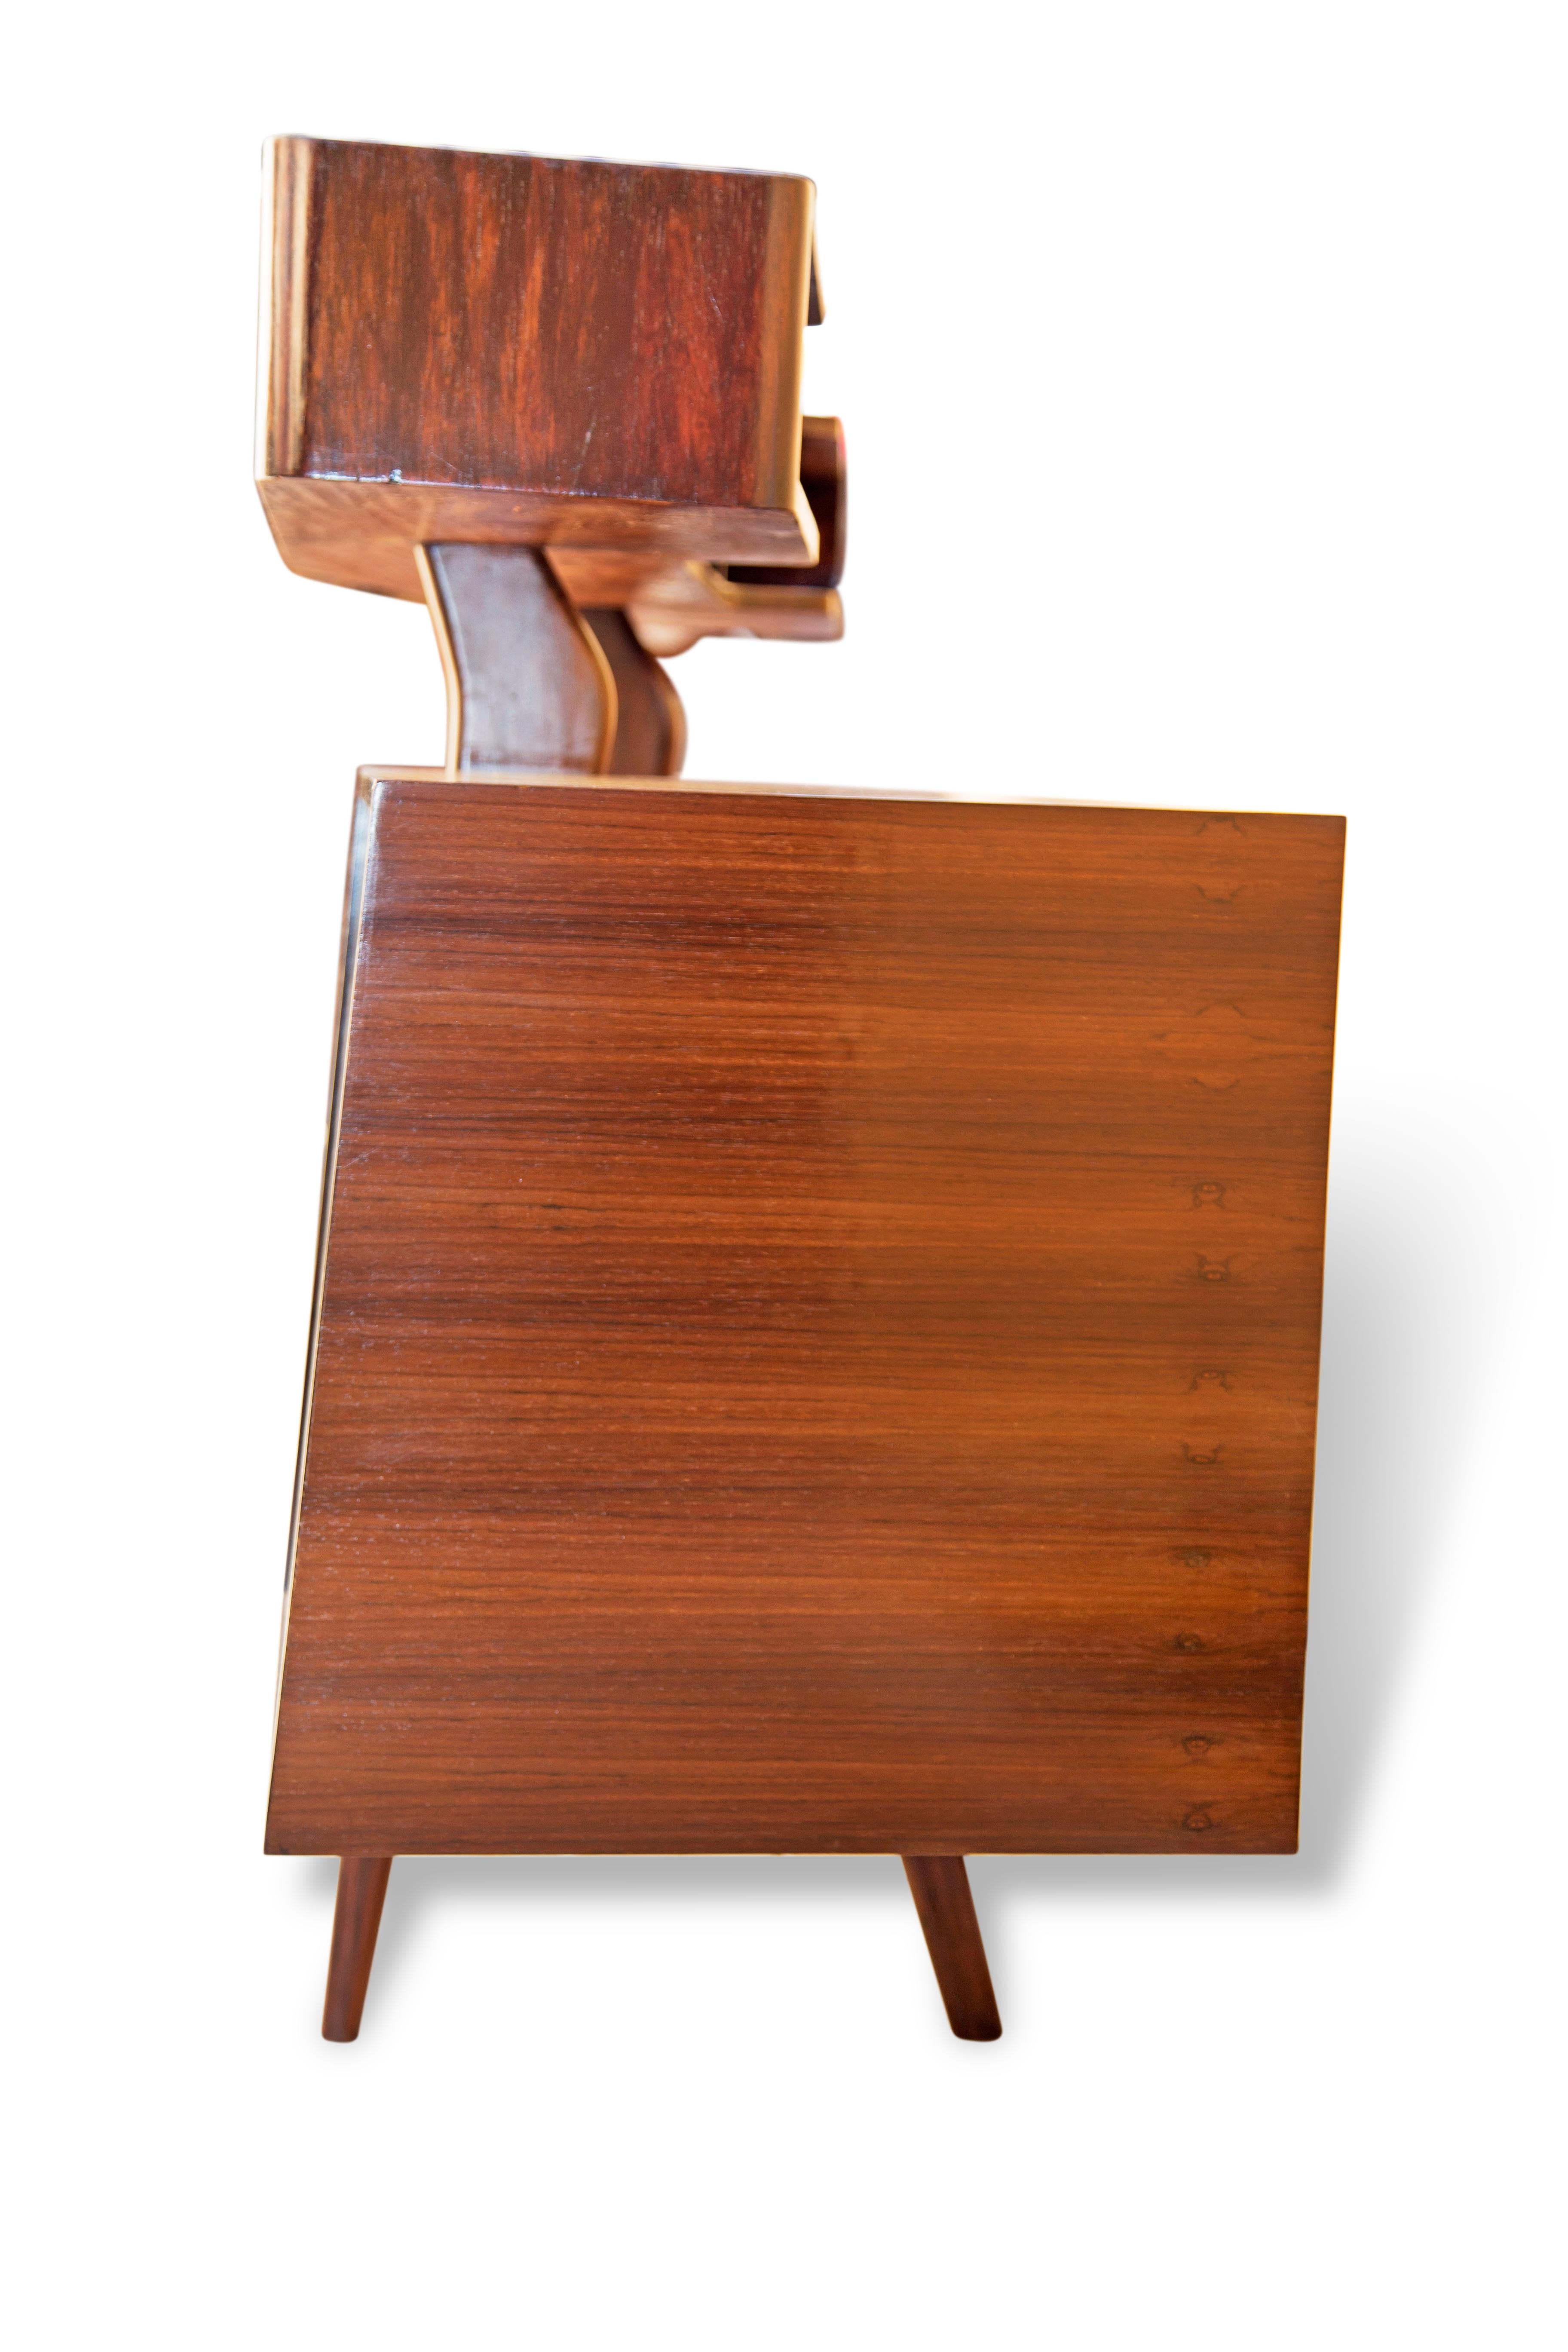 Hand-Crafted Brazilian Modern Hand Painted Bar in Hardwood by G. Scapinelli, 1950s, Brazil